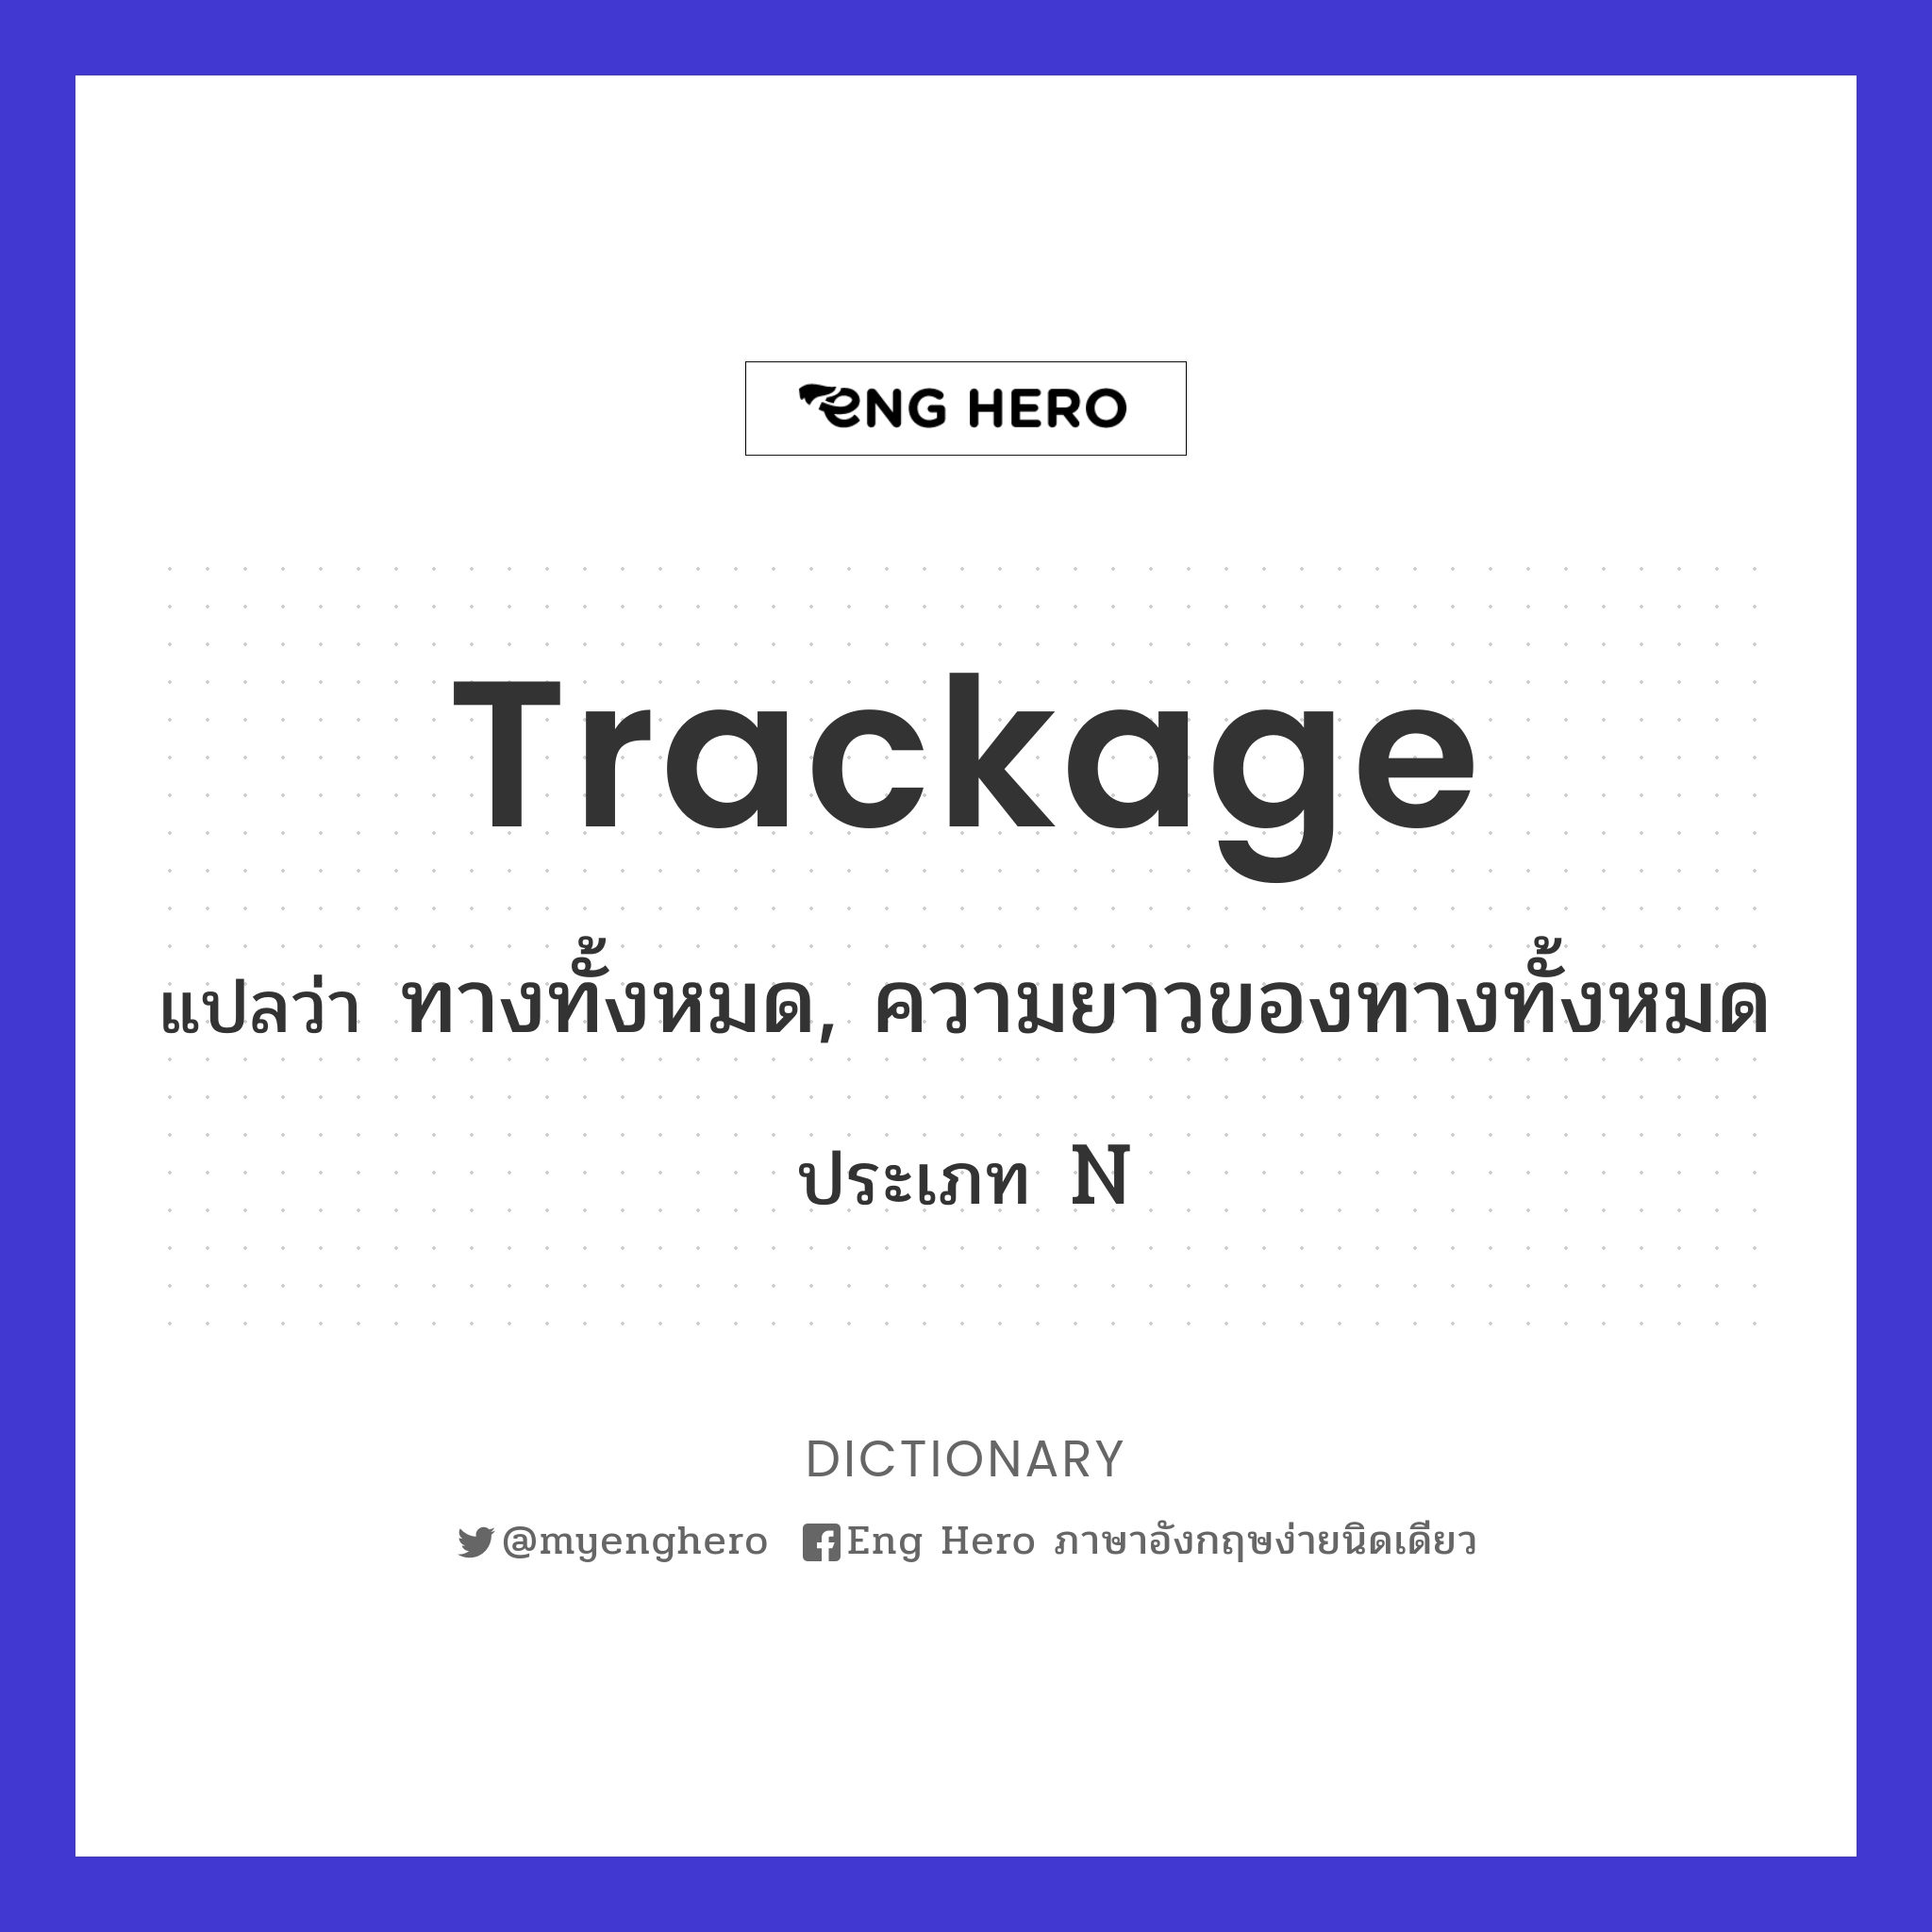 trackage